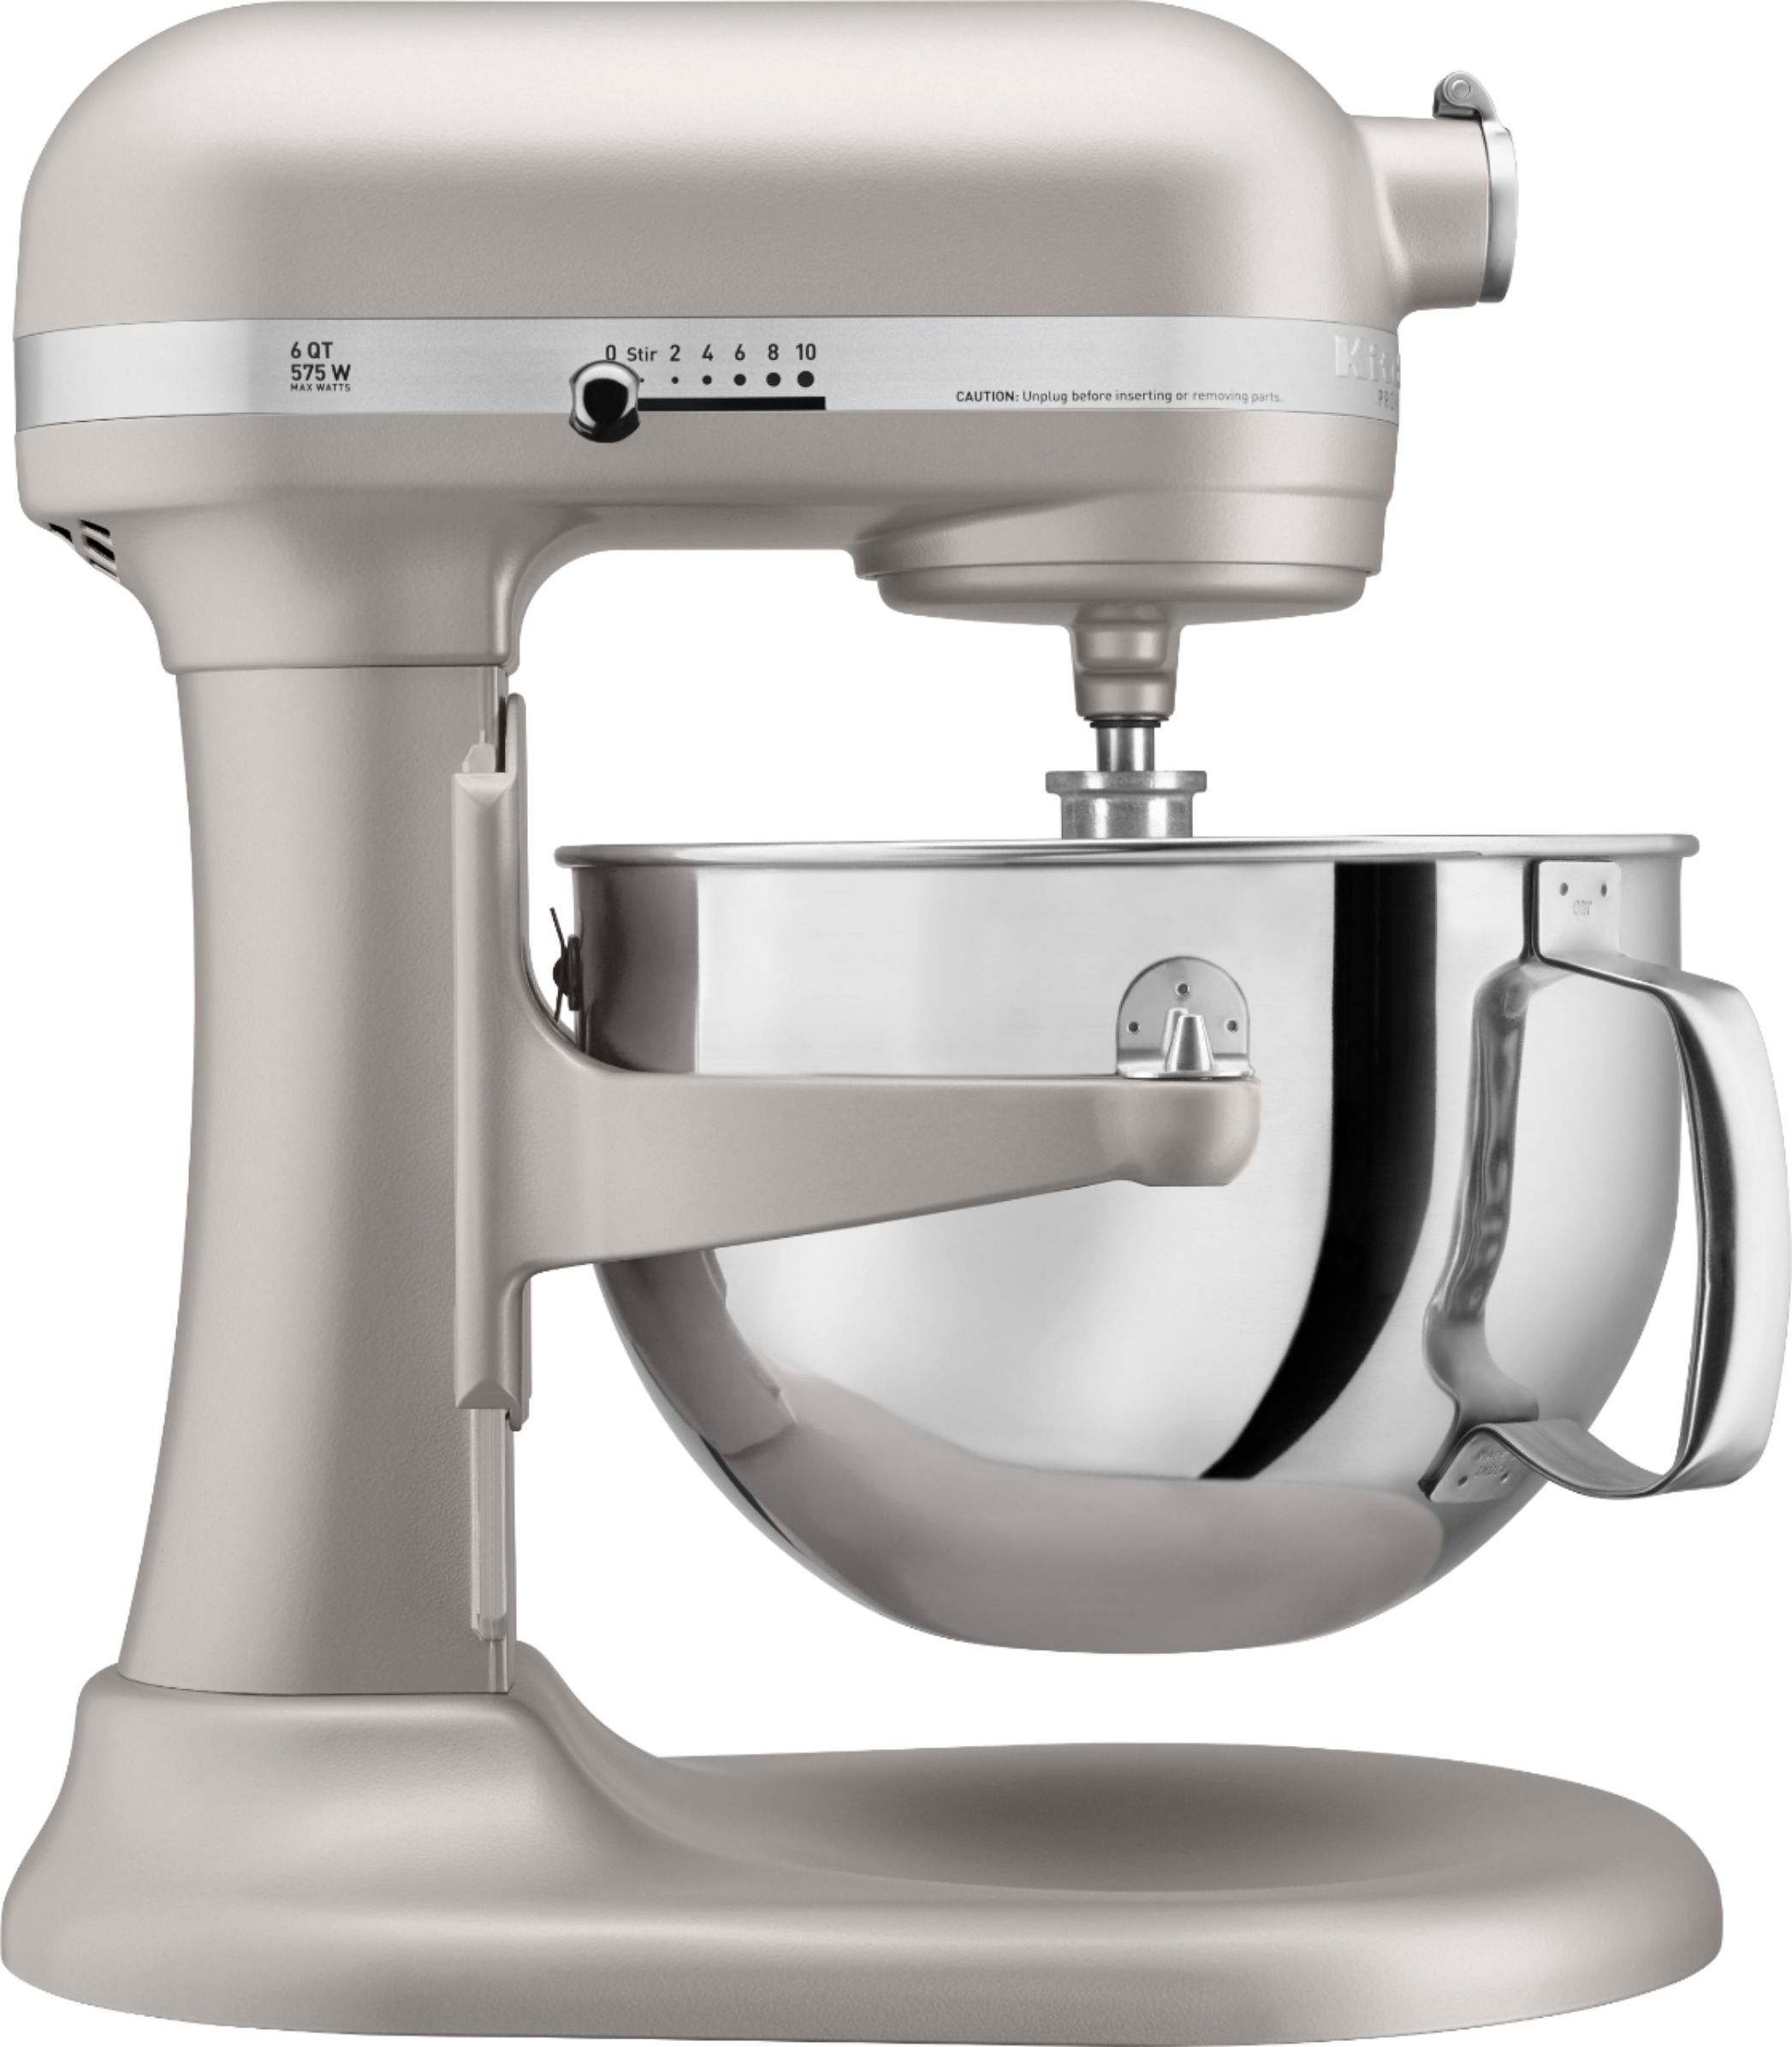 Official KitchenAid KP26M1XWH5 stand mixer parts